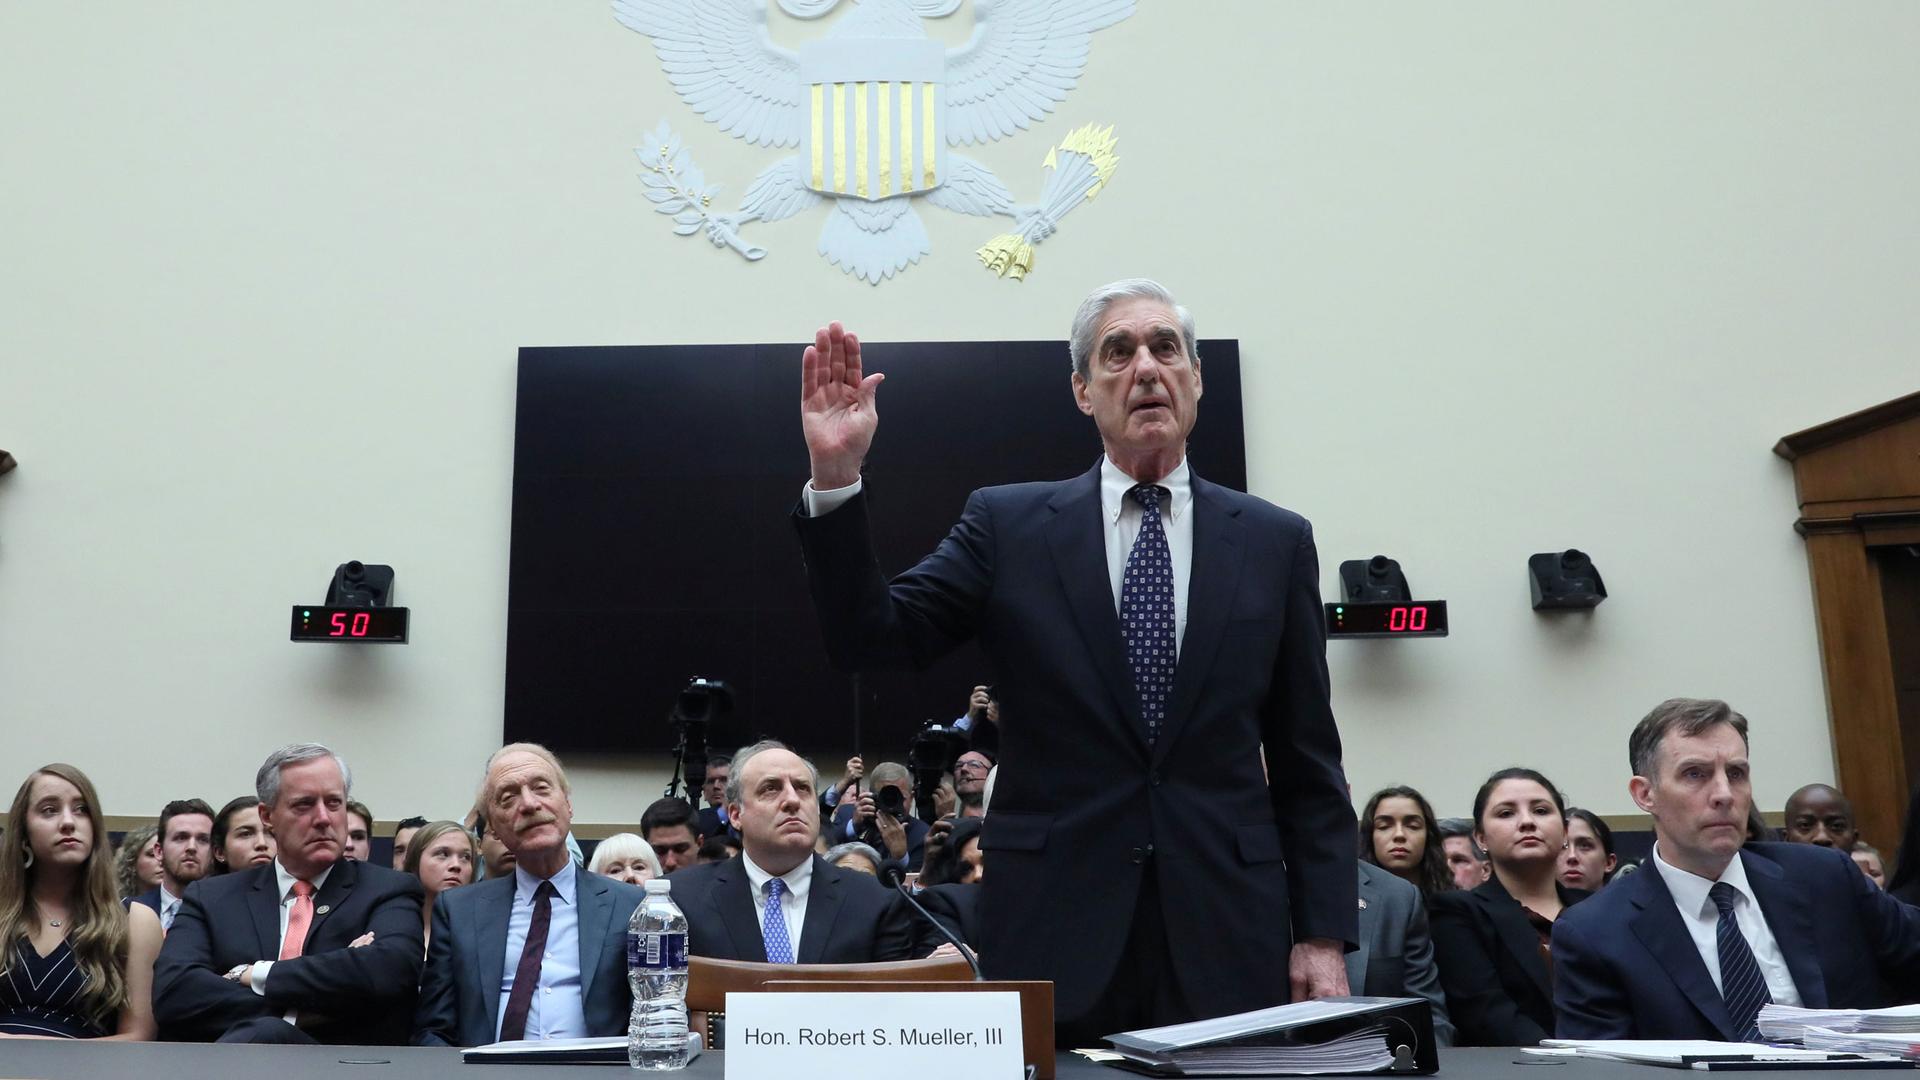 Former Special Counsel Robert Mueller is shown with his right hand raised with a crowd of people seated behind him.